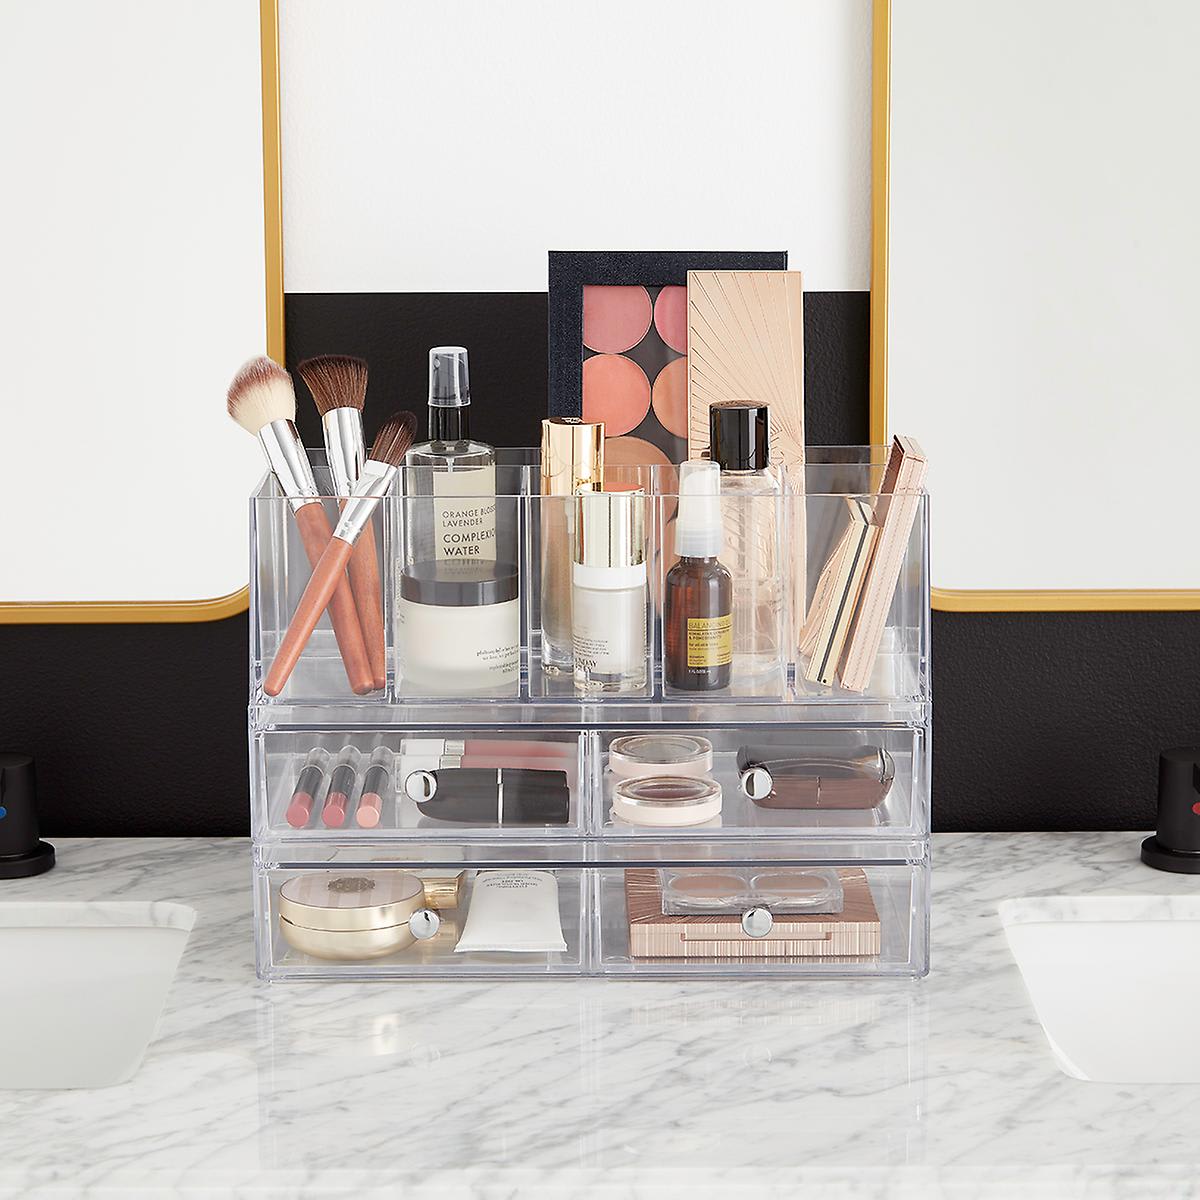 Stylish and Affordable Acrylic Makeup Organizers